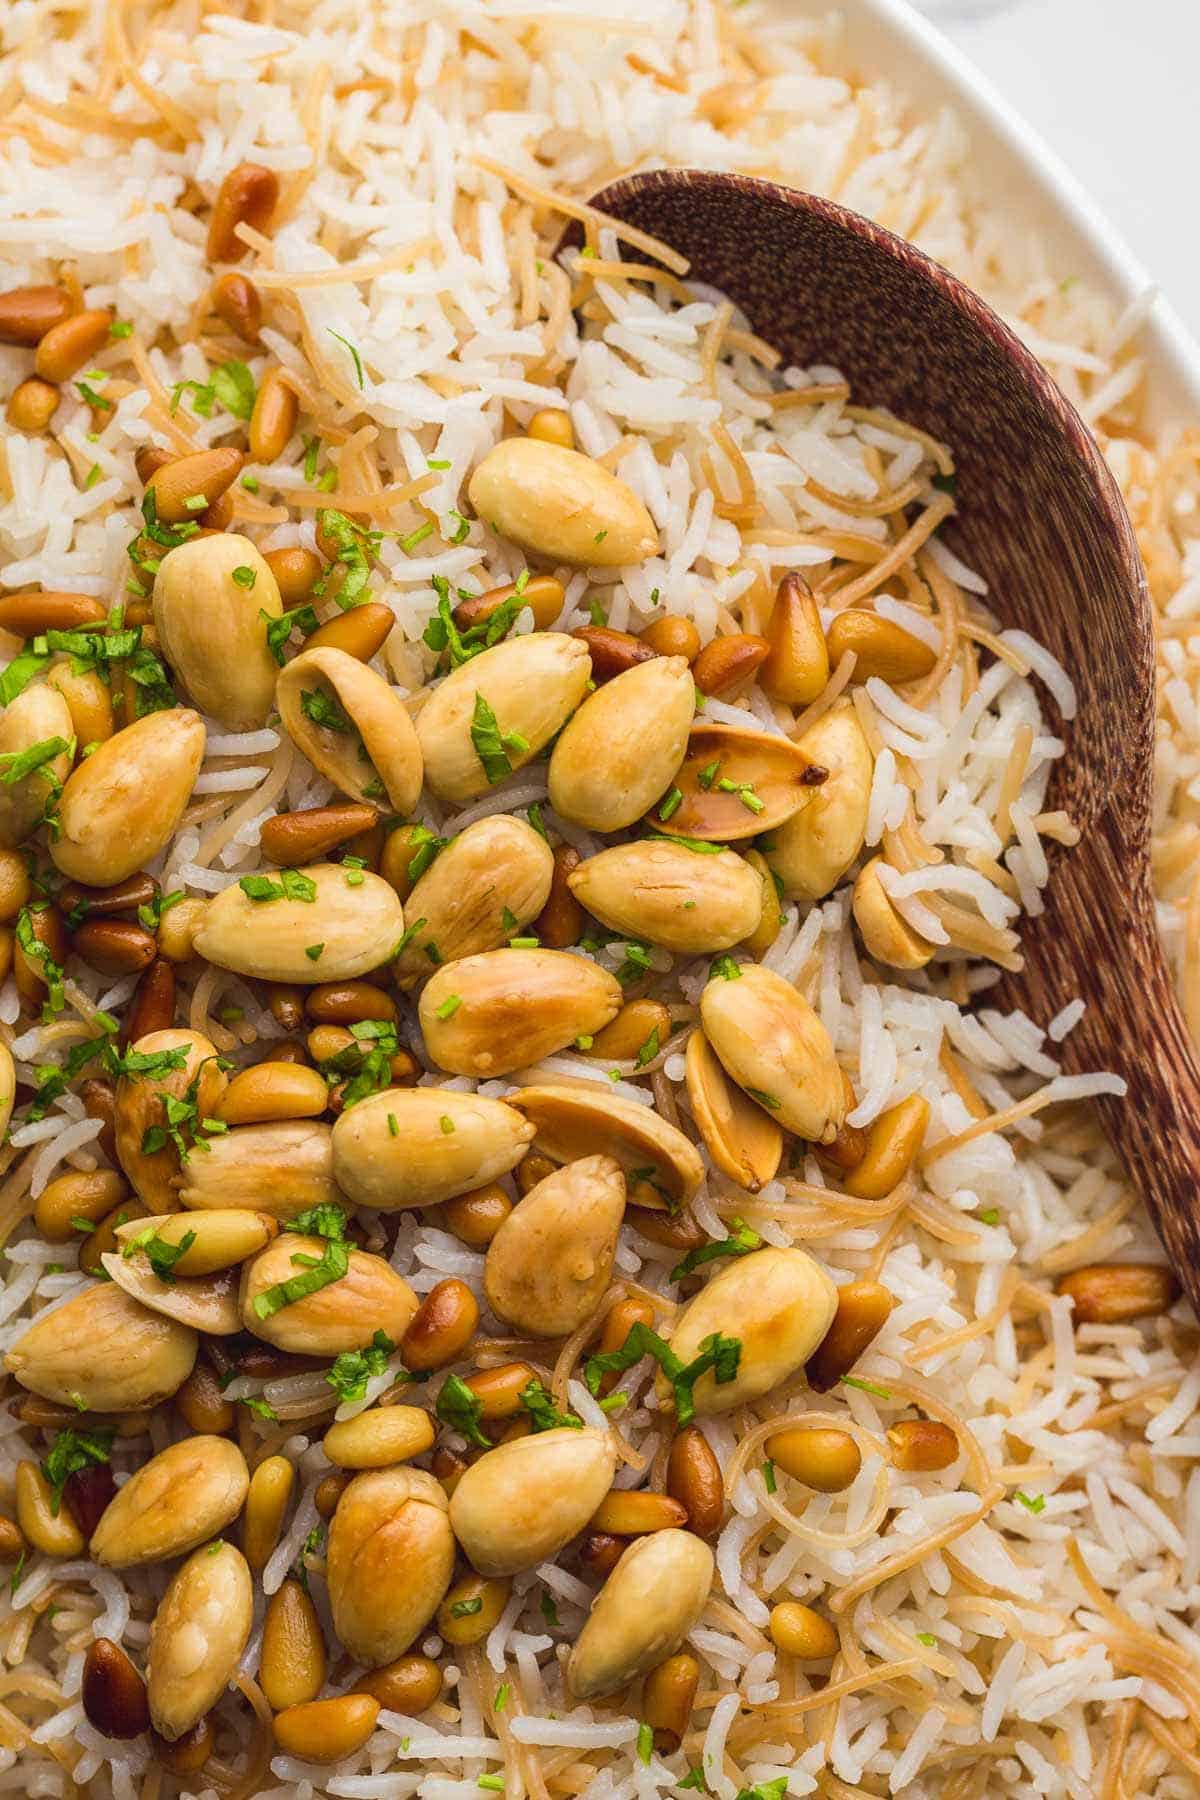 Lebanese rice a.k.a Vermicelli rice with toasted nuts, and wooden serving spoon